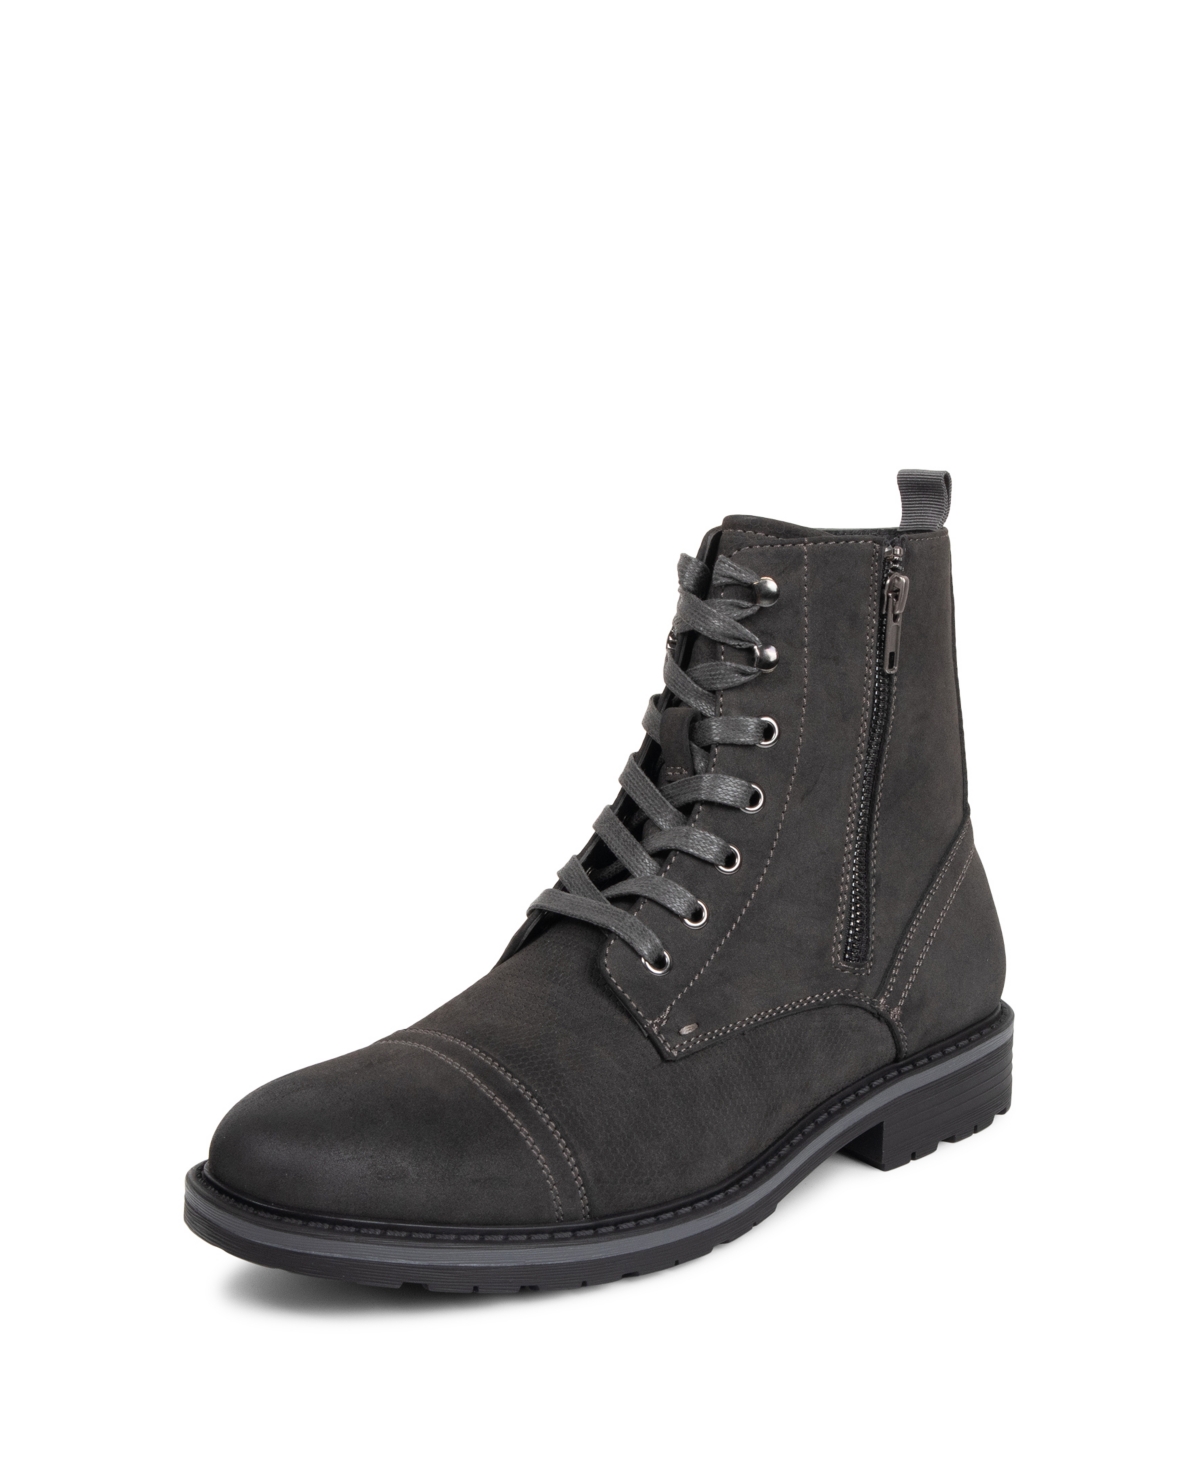 by Kenneth Cole Men's Captain Boots - Gray